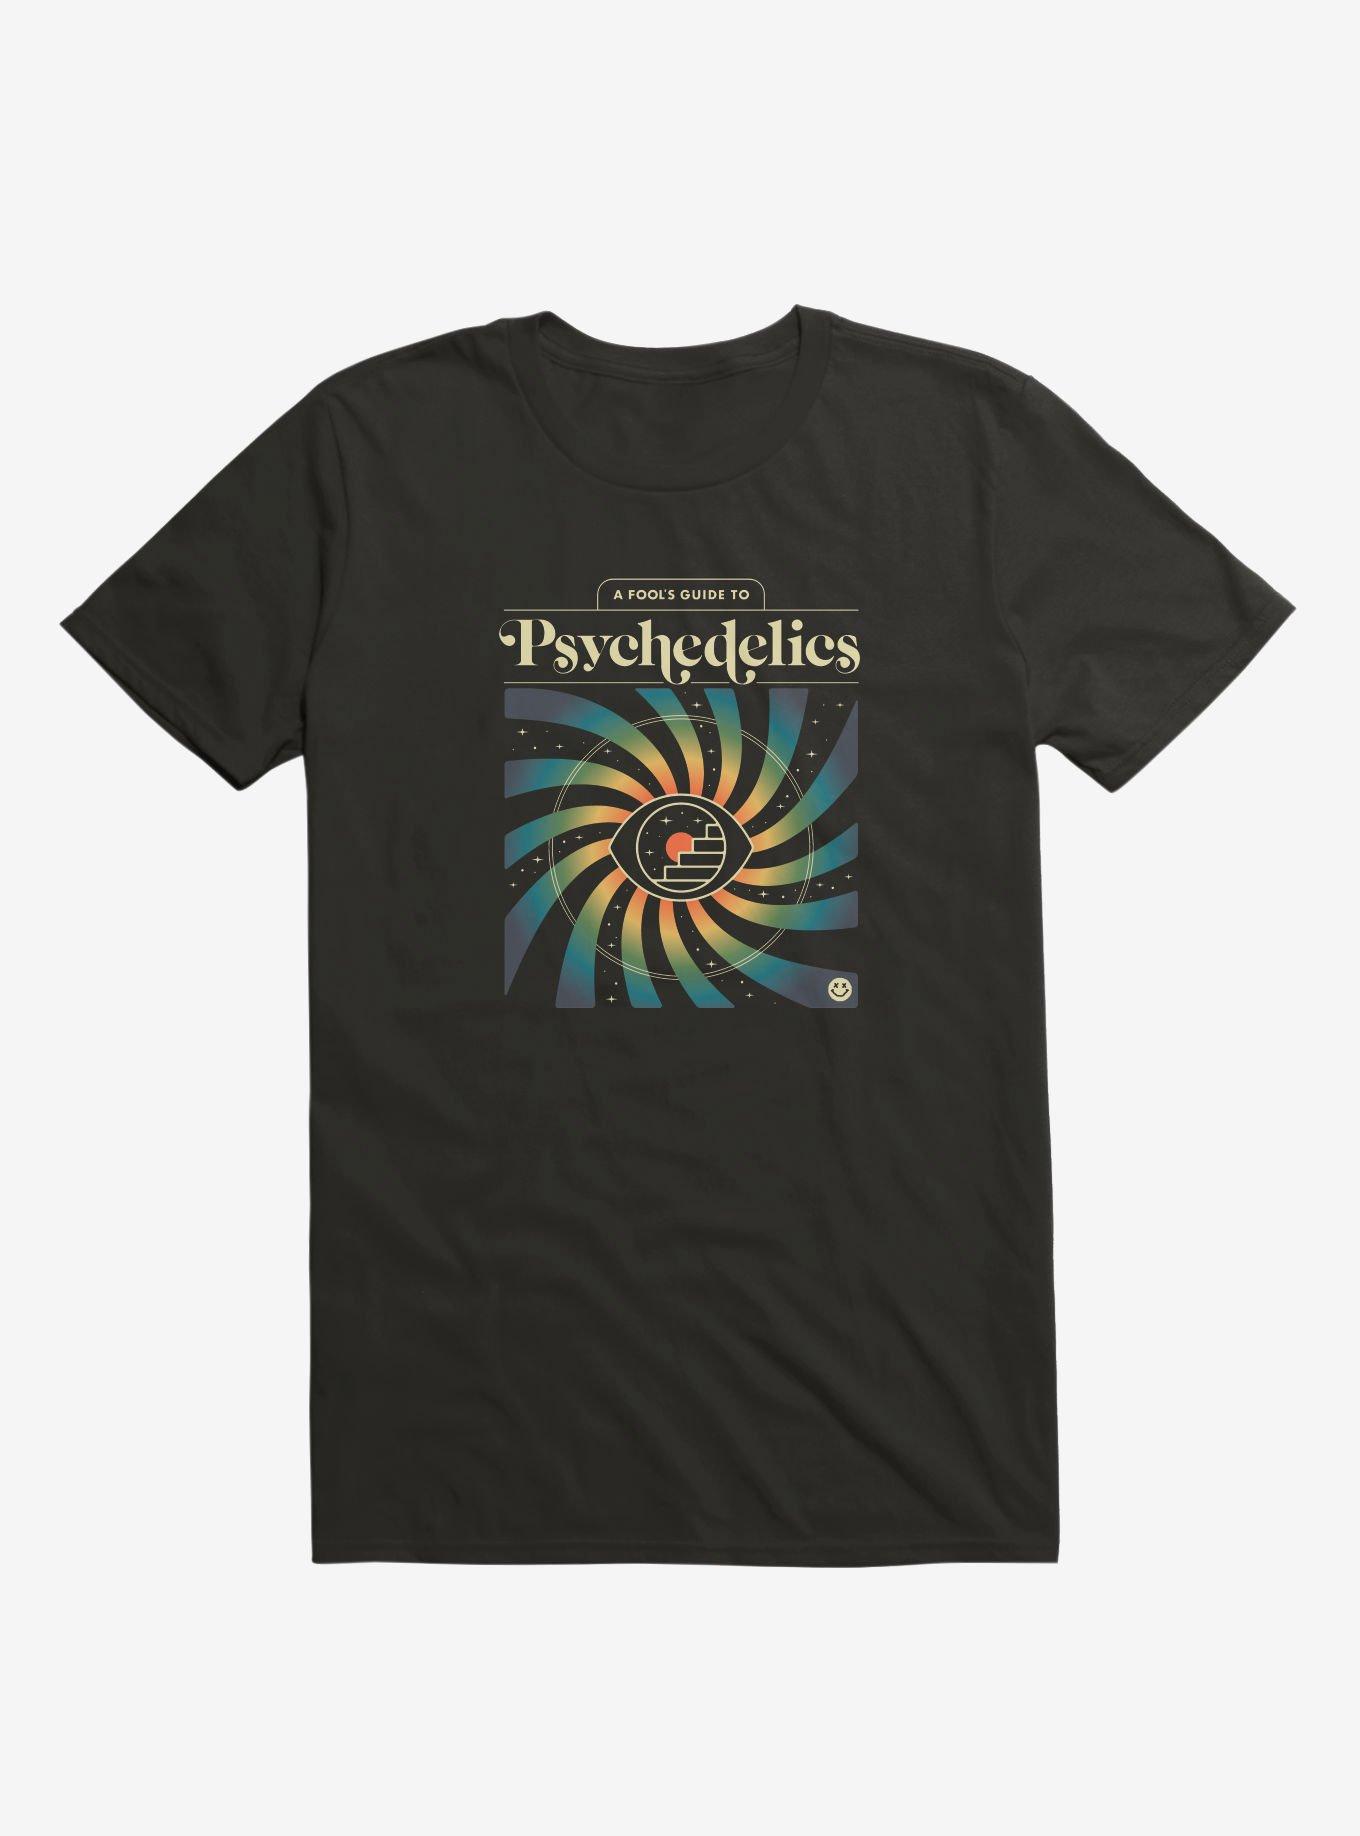 A Fool's Guide to Psychedelics T-Shirt